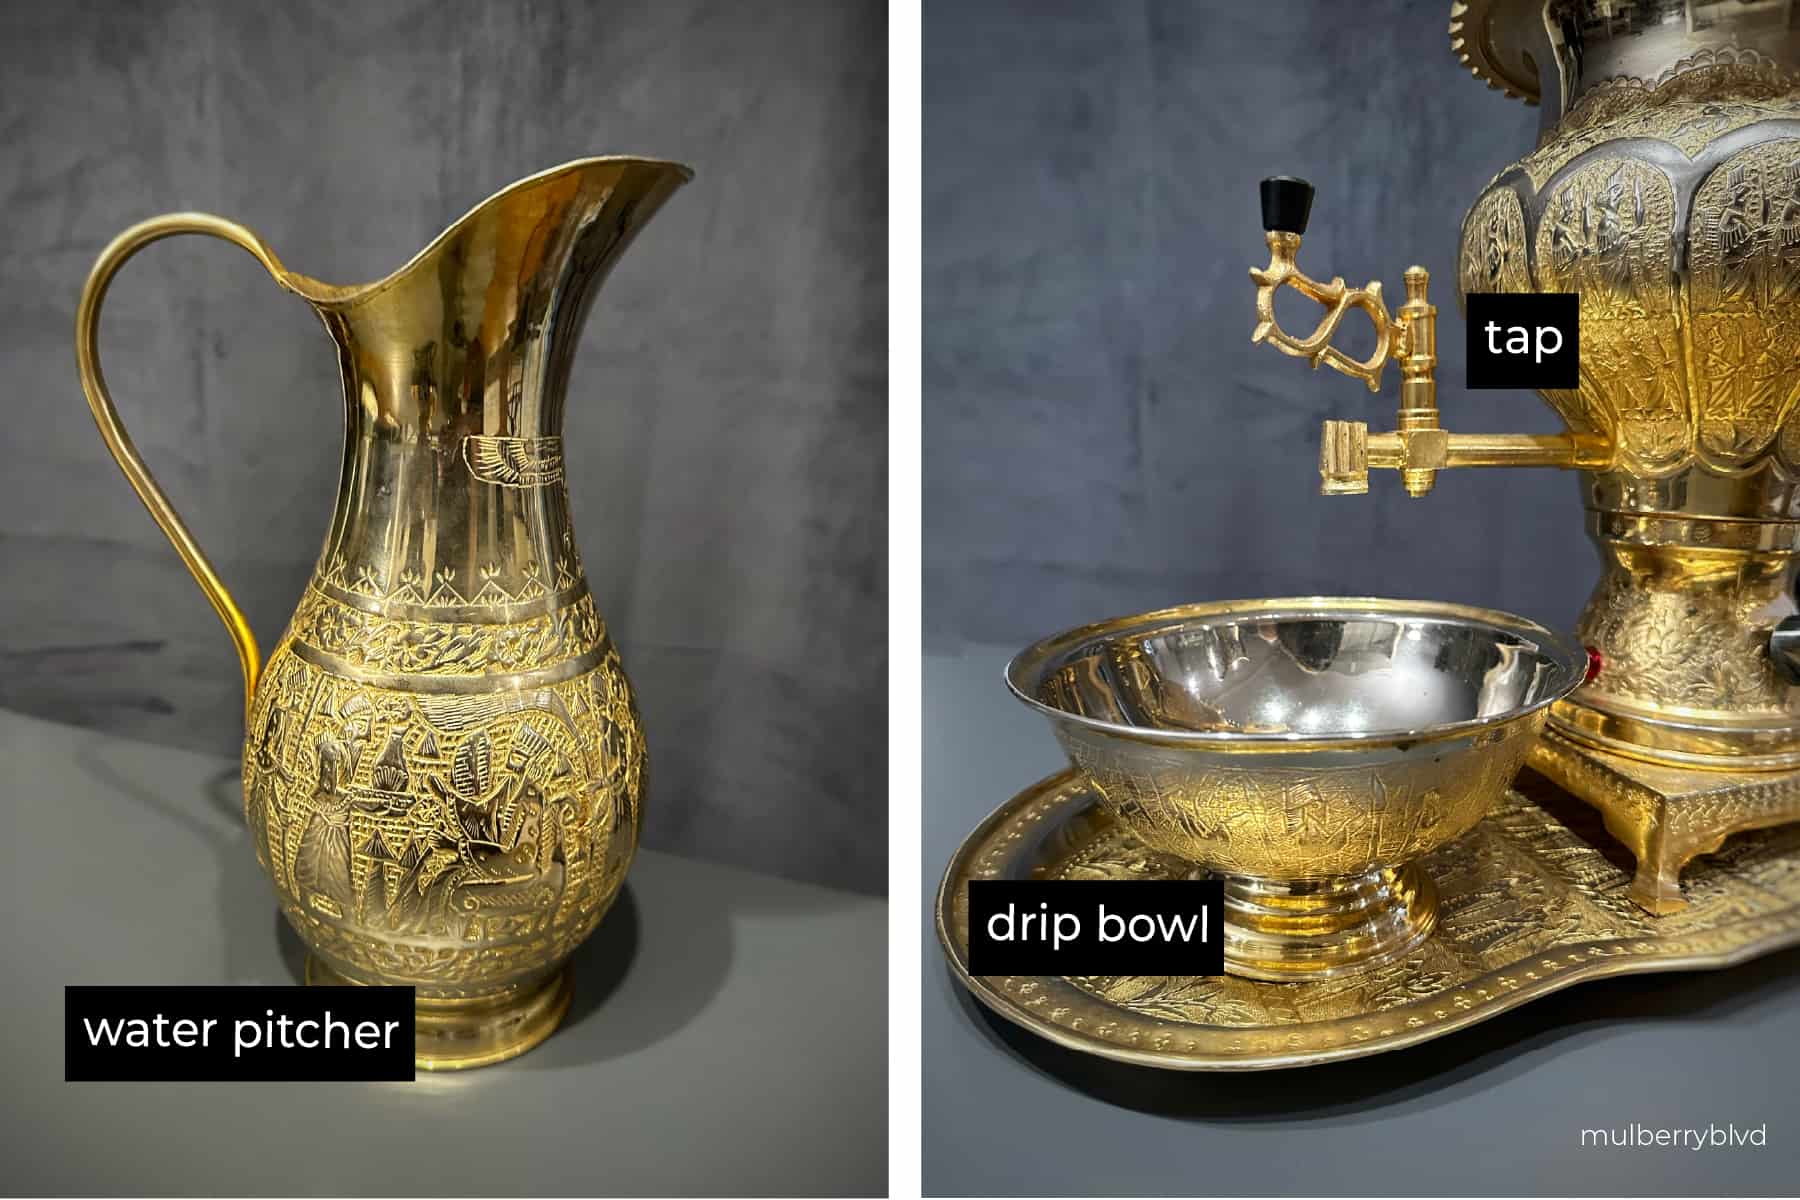 Gold water pitcher and picture of the tap and drip bowl